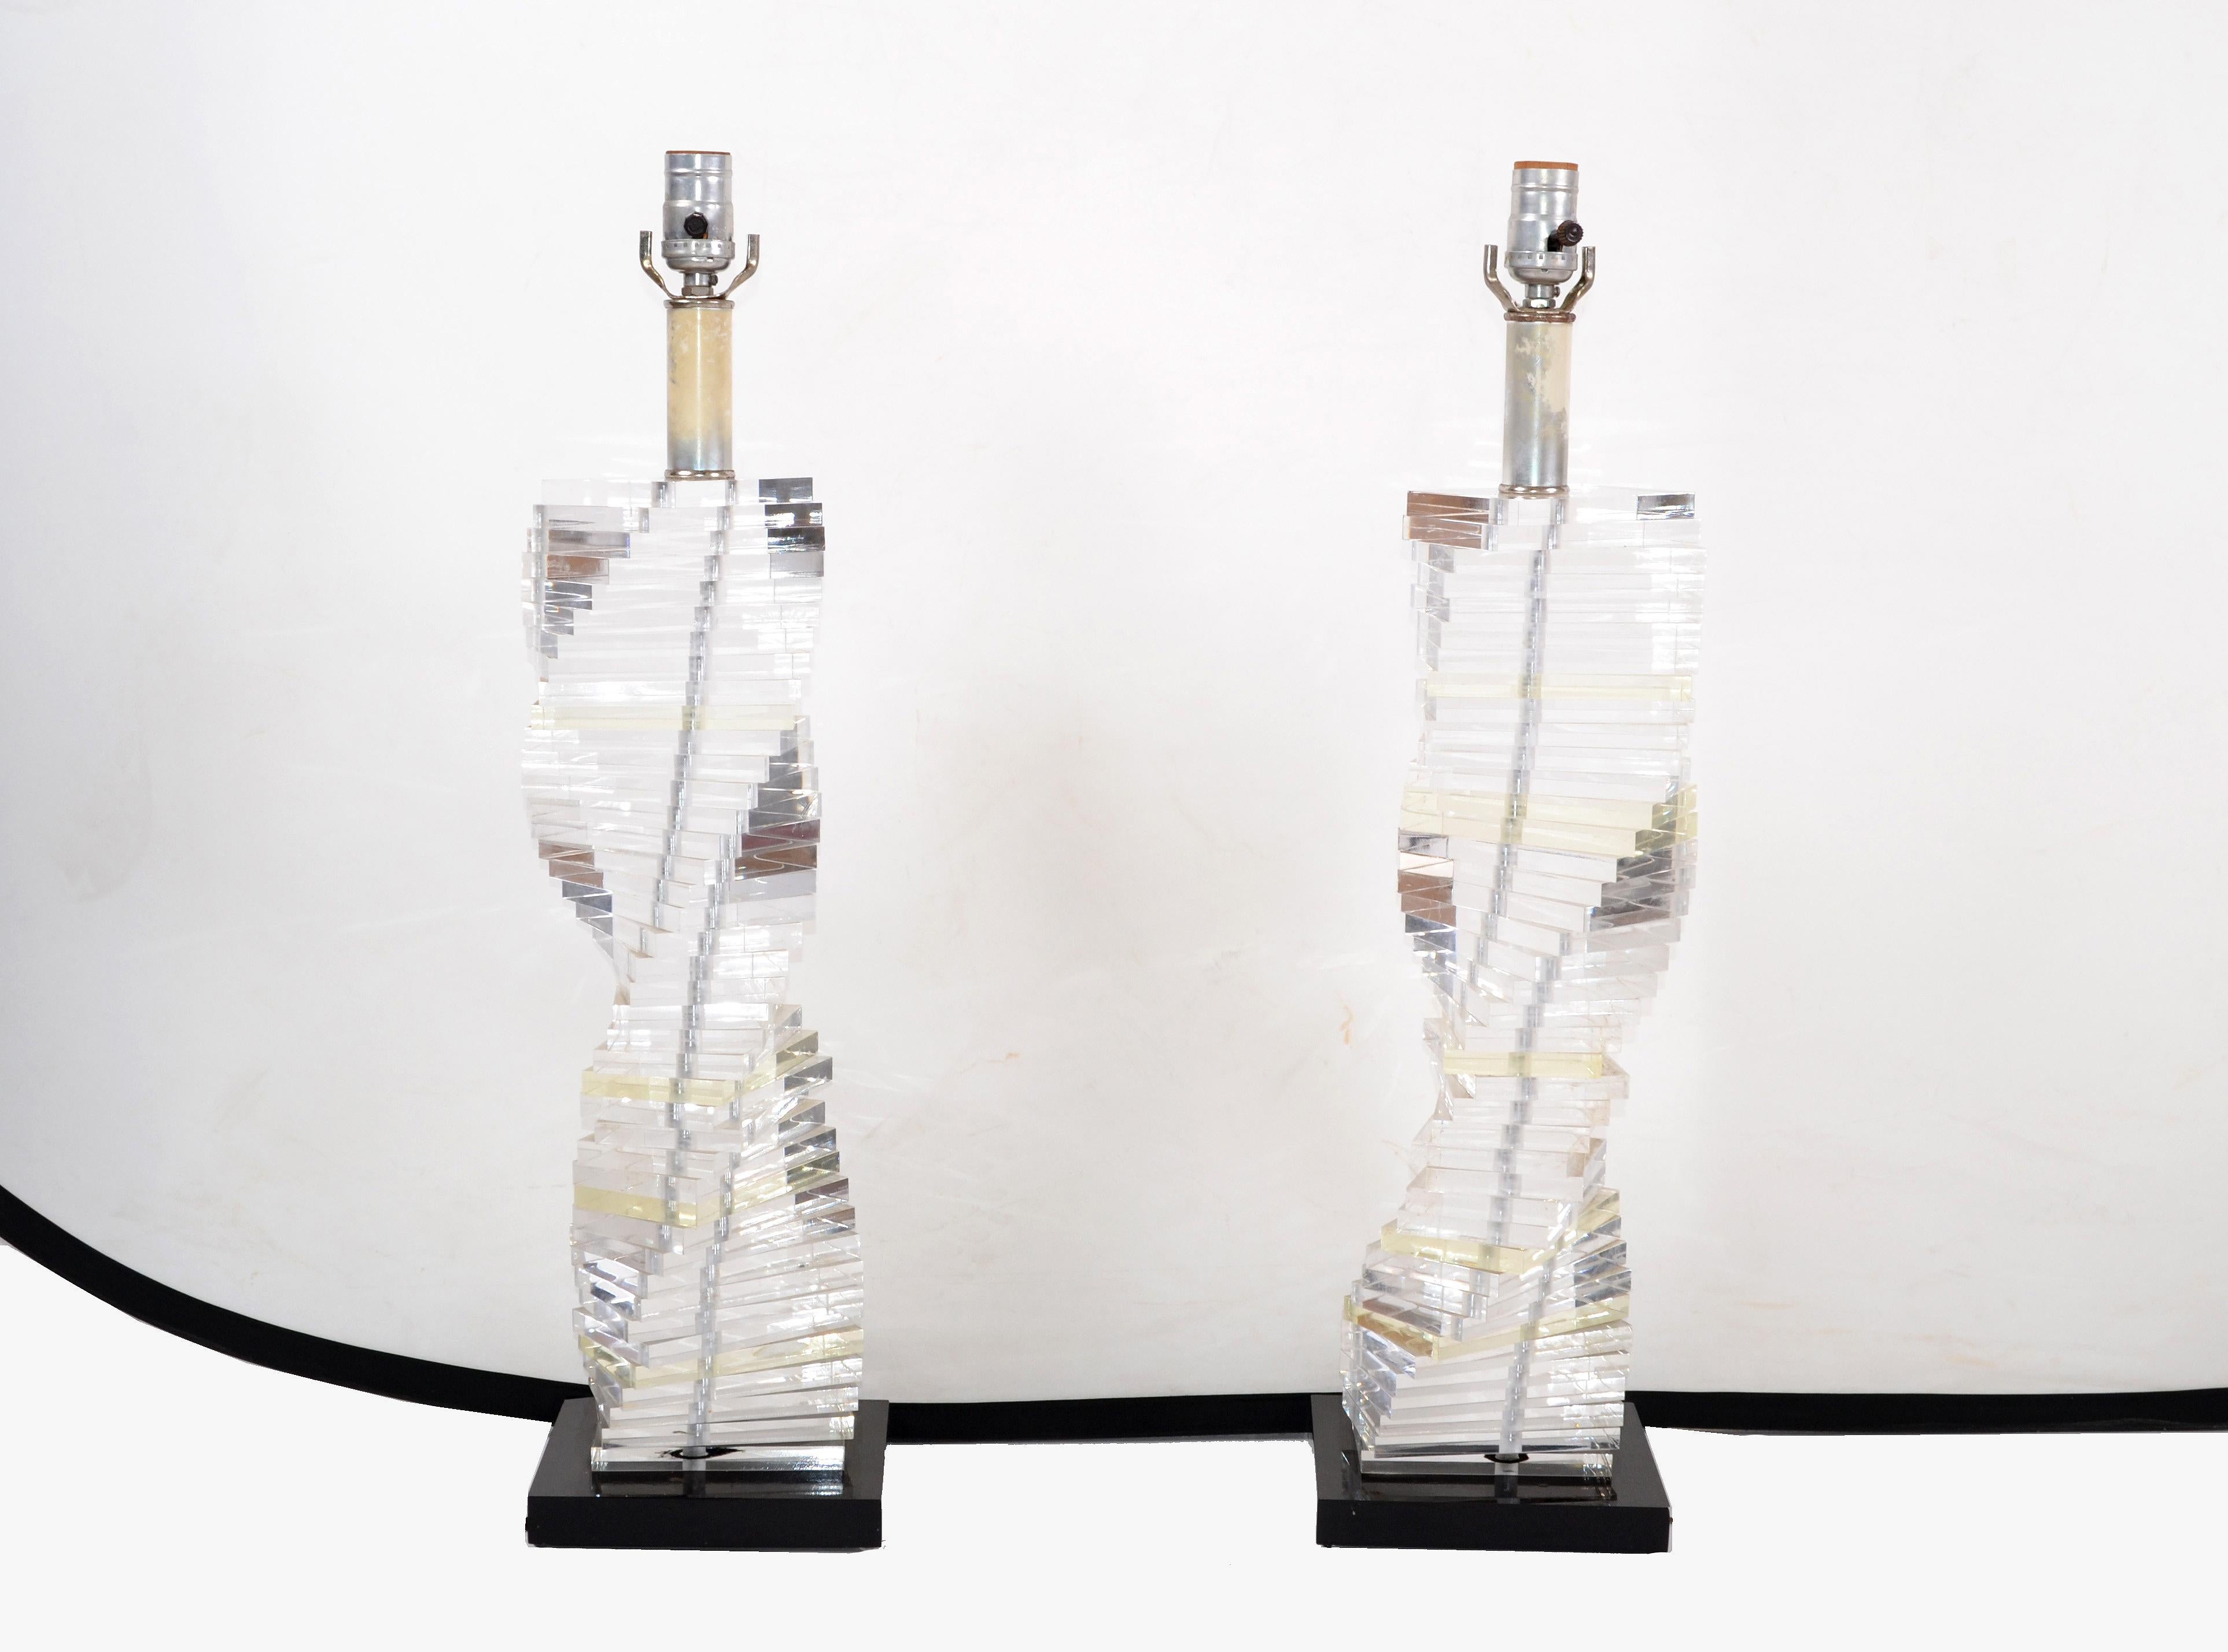 Superb pair of Lucite lamps, black Lucite base and spriral stacked staircase design of clear Lucite.
US wired and each takes one regular or LED light bulb.
No Shade, Harp or Finial.